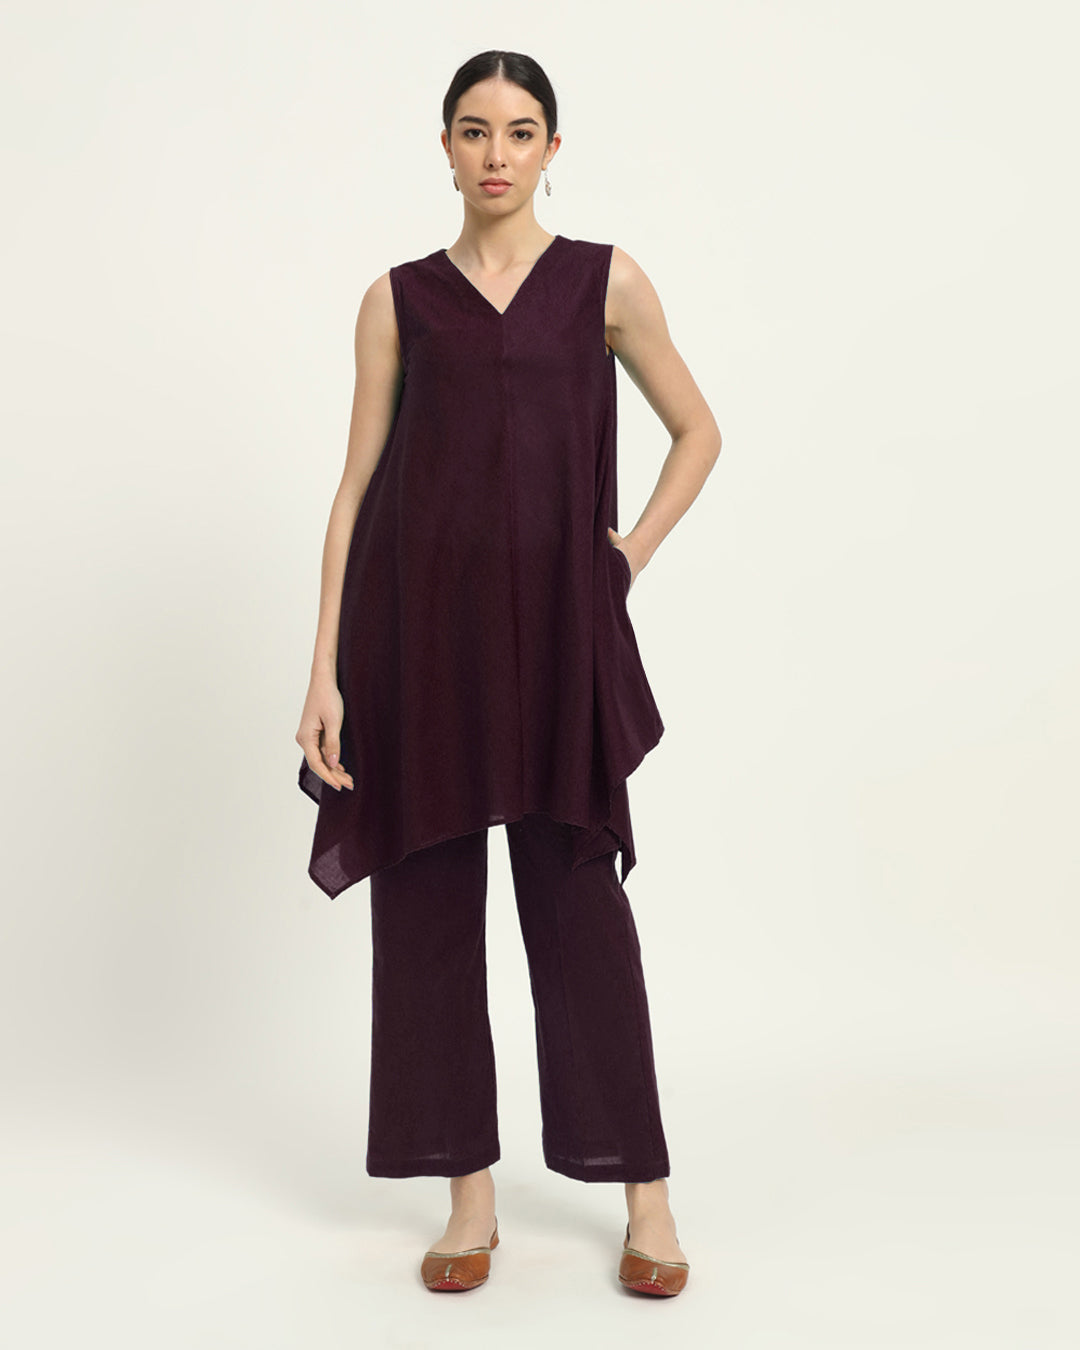 Plum Passion Midsummer Dream Solid Co-ord Set